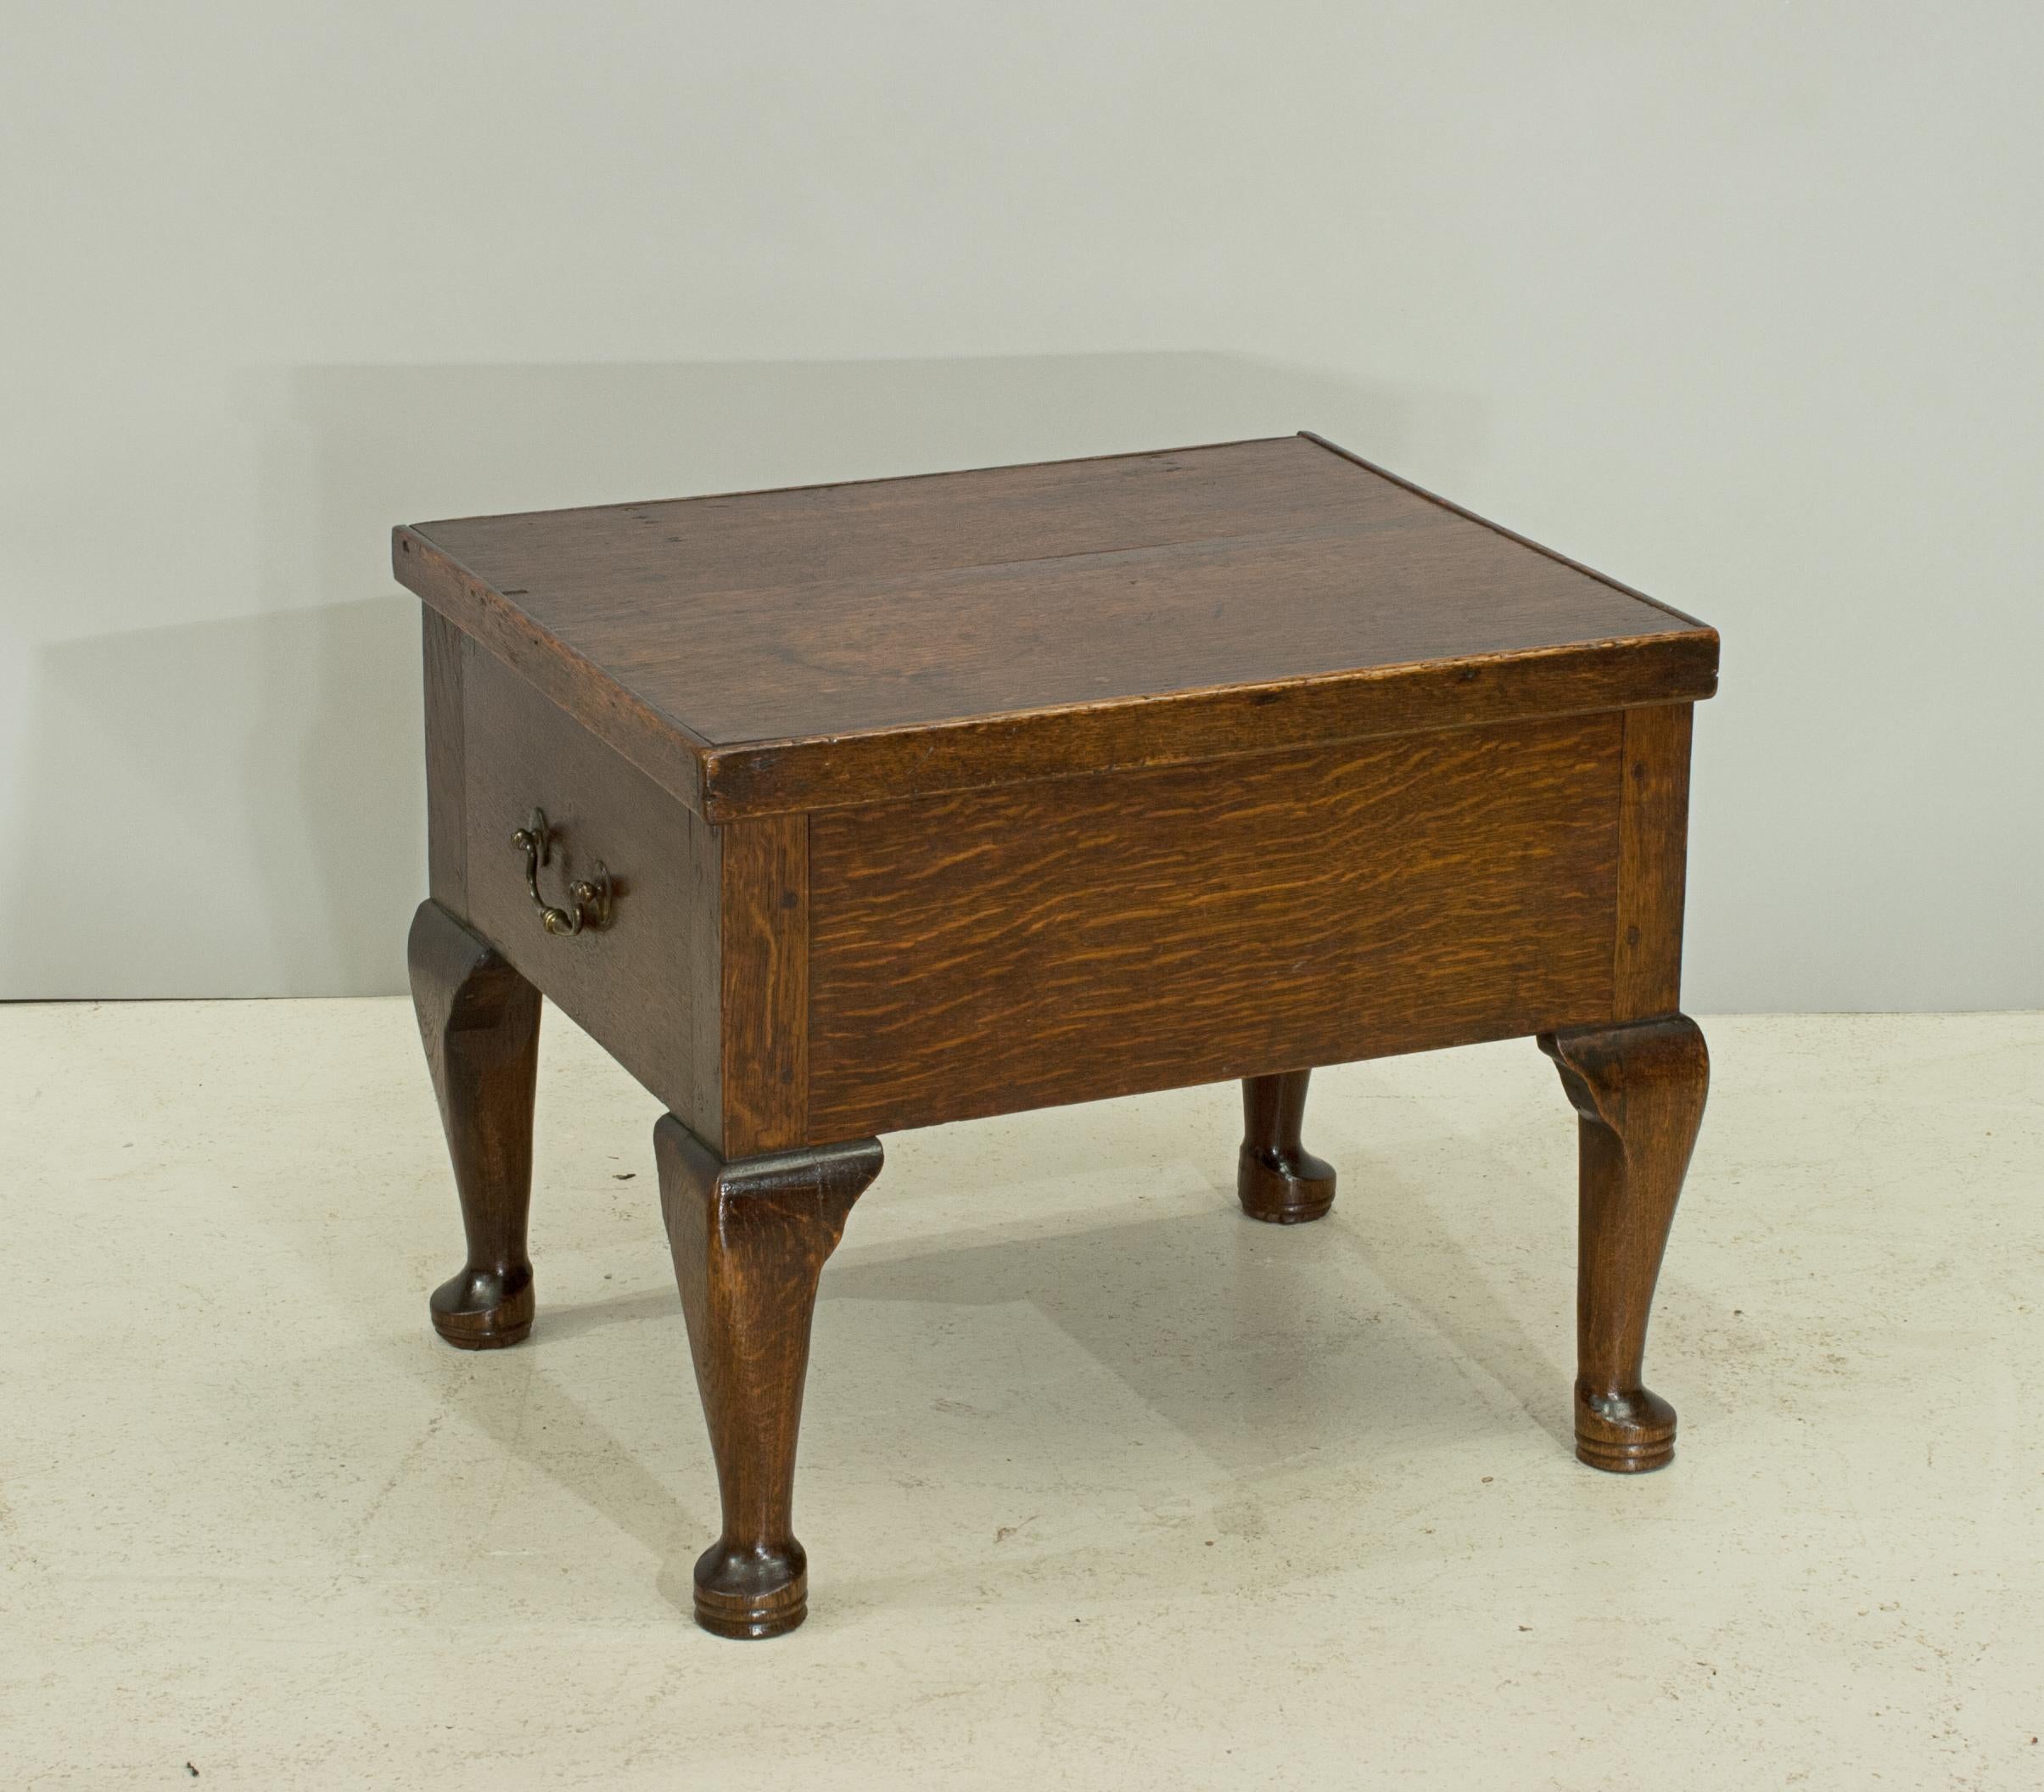 British Antique Oak Commode on Cabriolet Legs, Converted to Storage